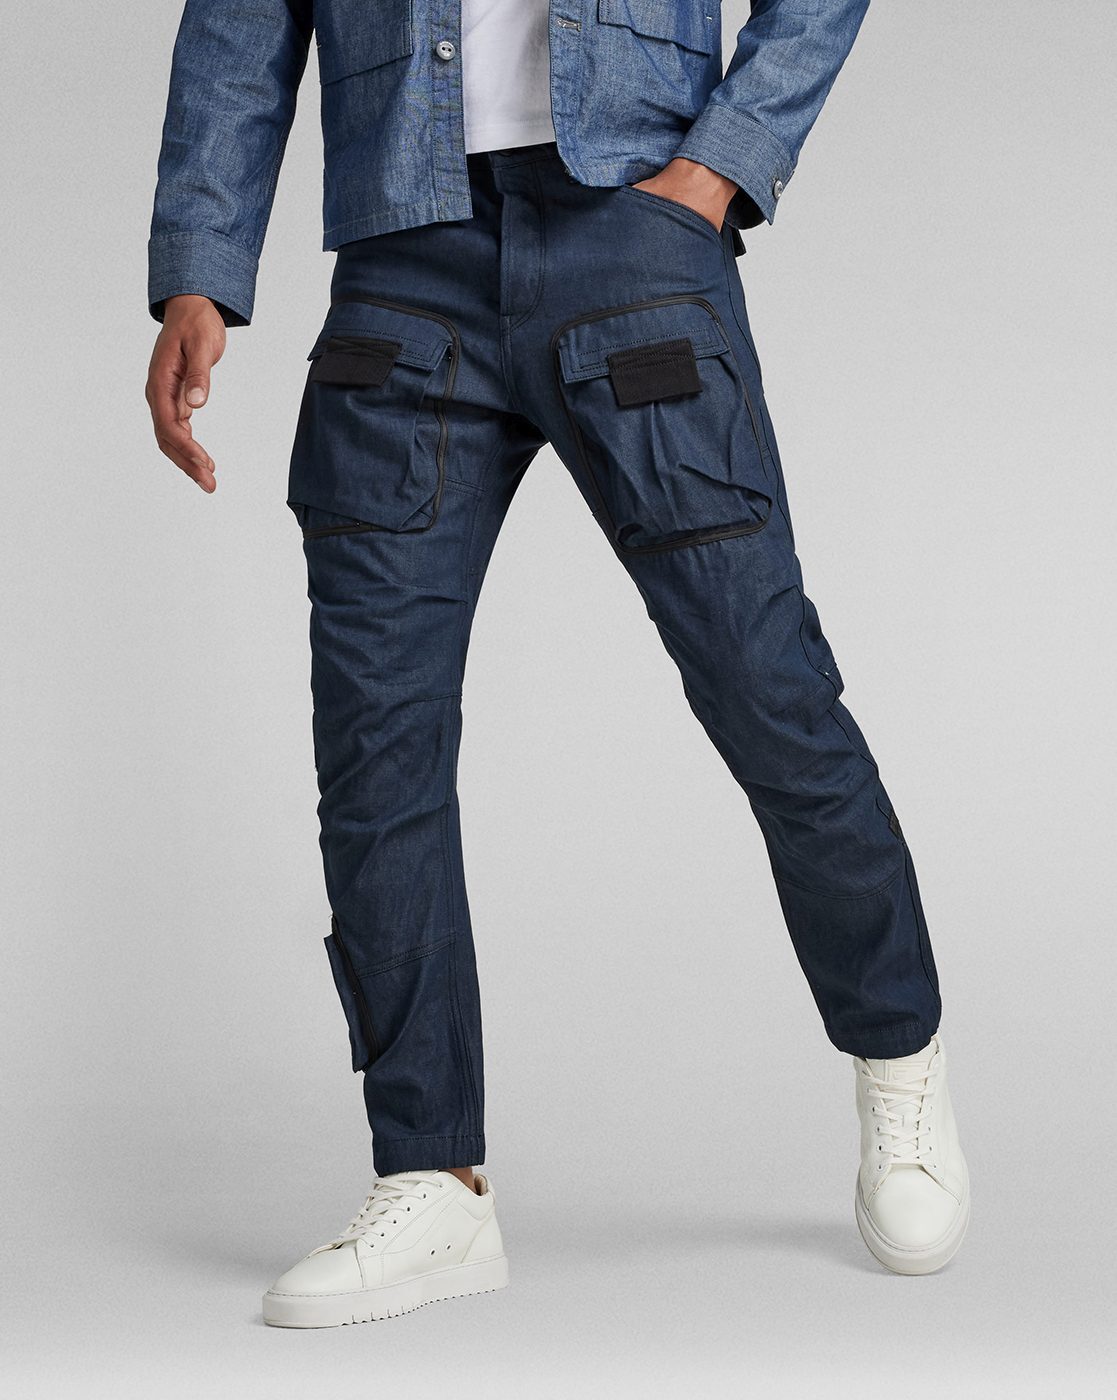 Buy Off-White Trousers & Pants for Men by G STAR RAW Online | Ajio.com